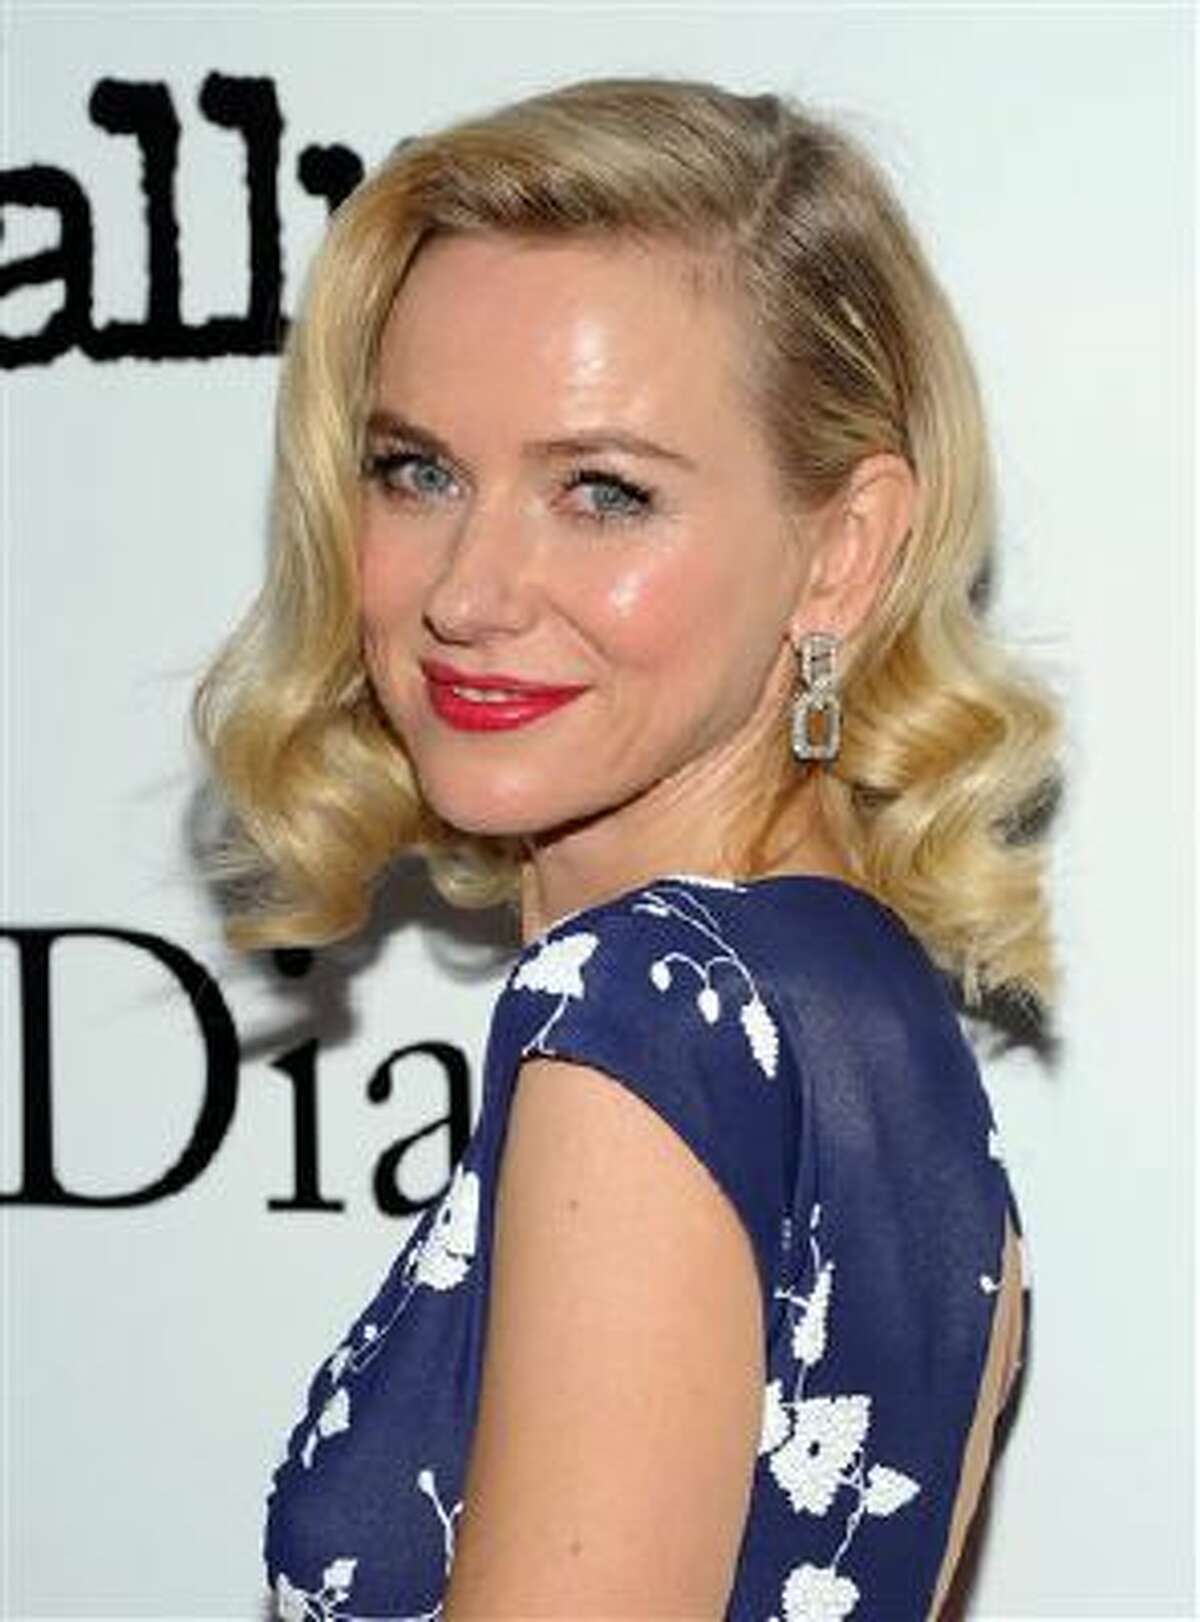 Actress Naomi Watts attends the premiere of "Diana" hosted by The Cinema Society, Linda Wells and Allure Magazine at the SVA Theater on Wednesday, Oct. 30, 2013 in New York.